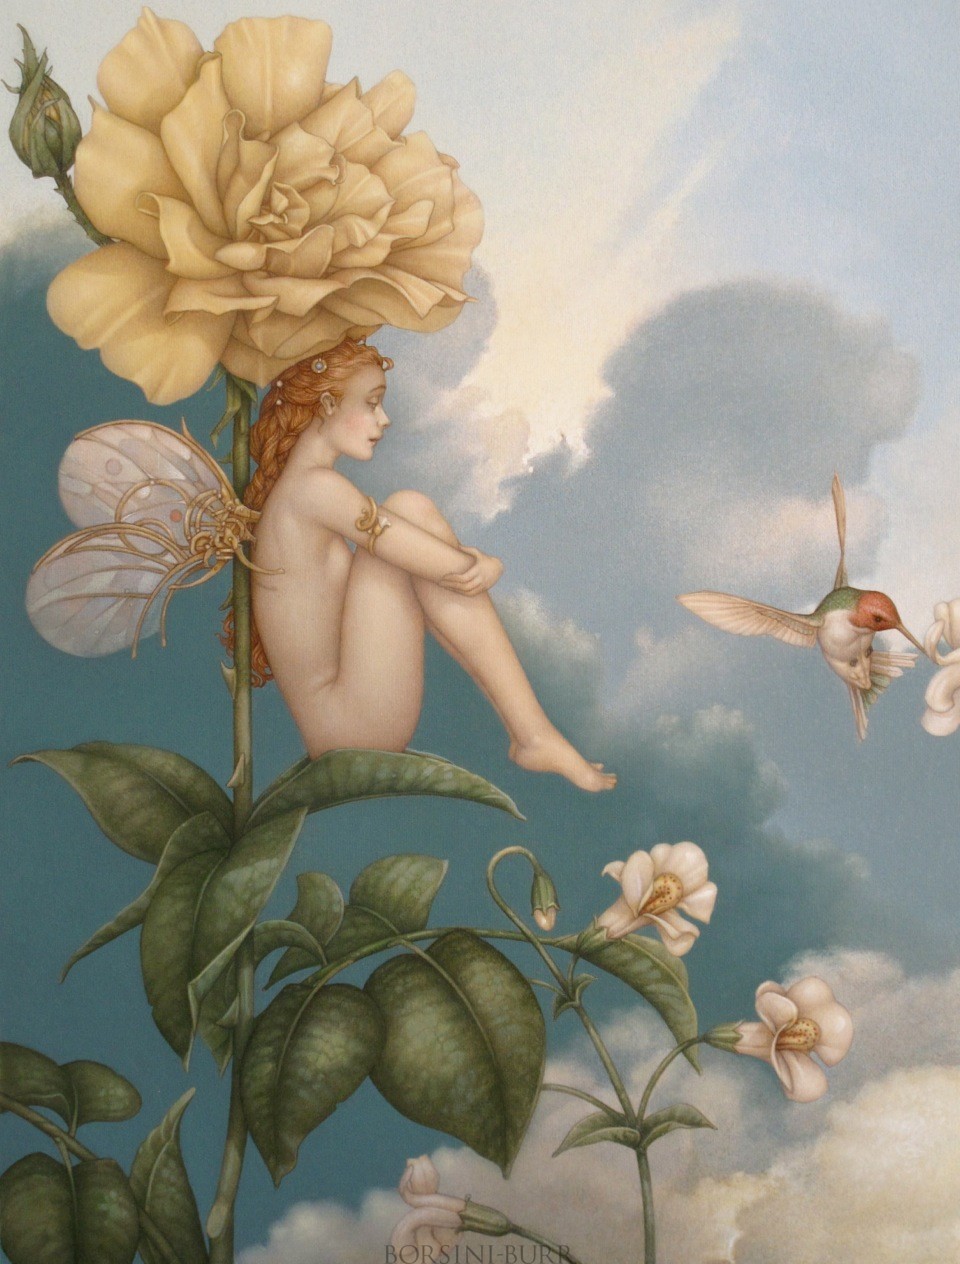 "Shade of the Rose" Original Oil on Canvas by Michael Parkes